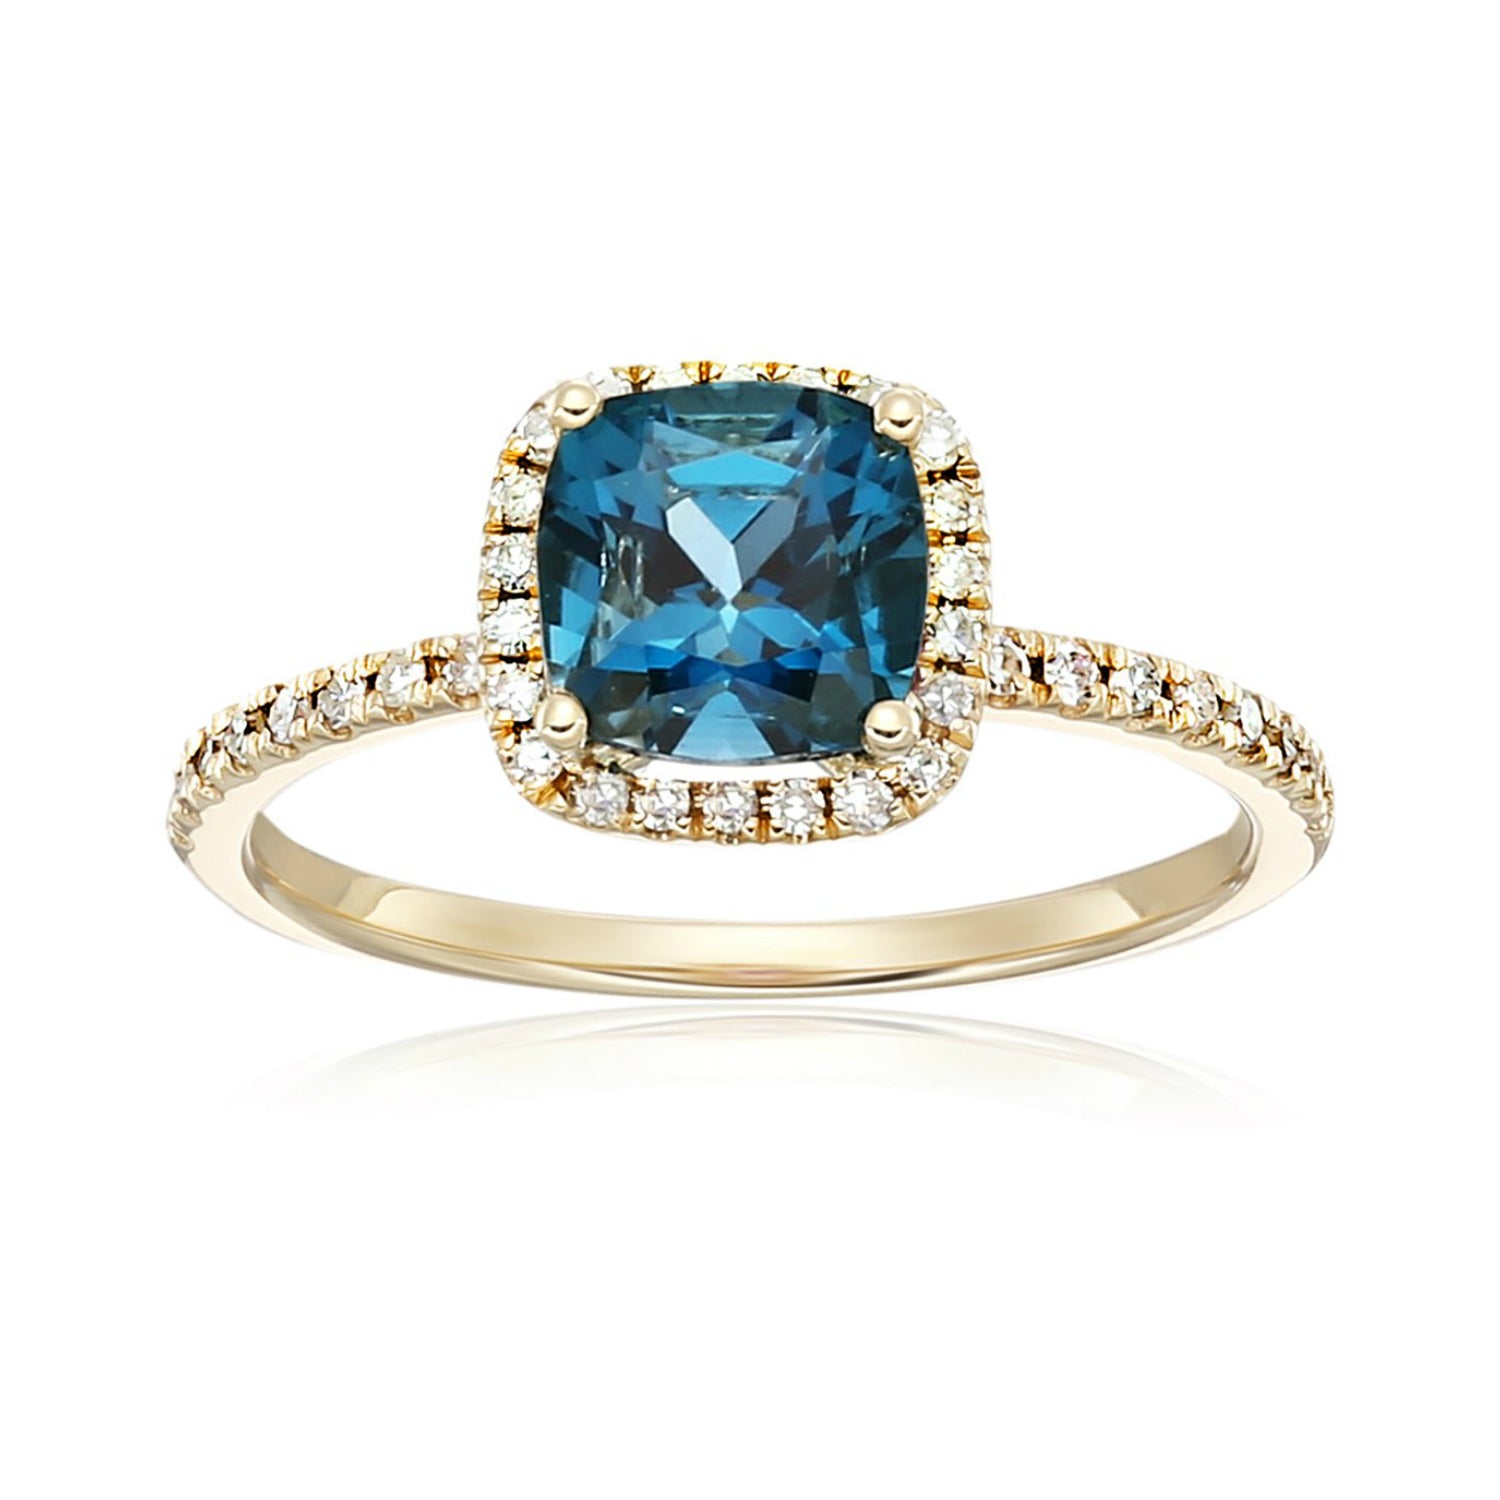 10k Yellow Gold London Blue Topaz and Diamond Cushion Halo Engagement Ring (1/4cttw, H-I Color, I1-I2 Clarity), - pinctore